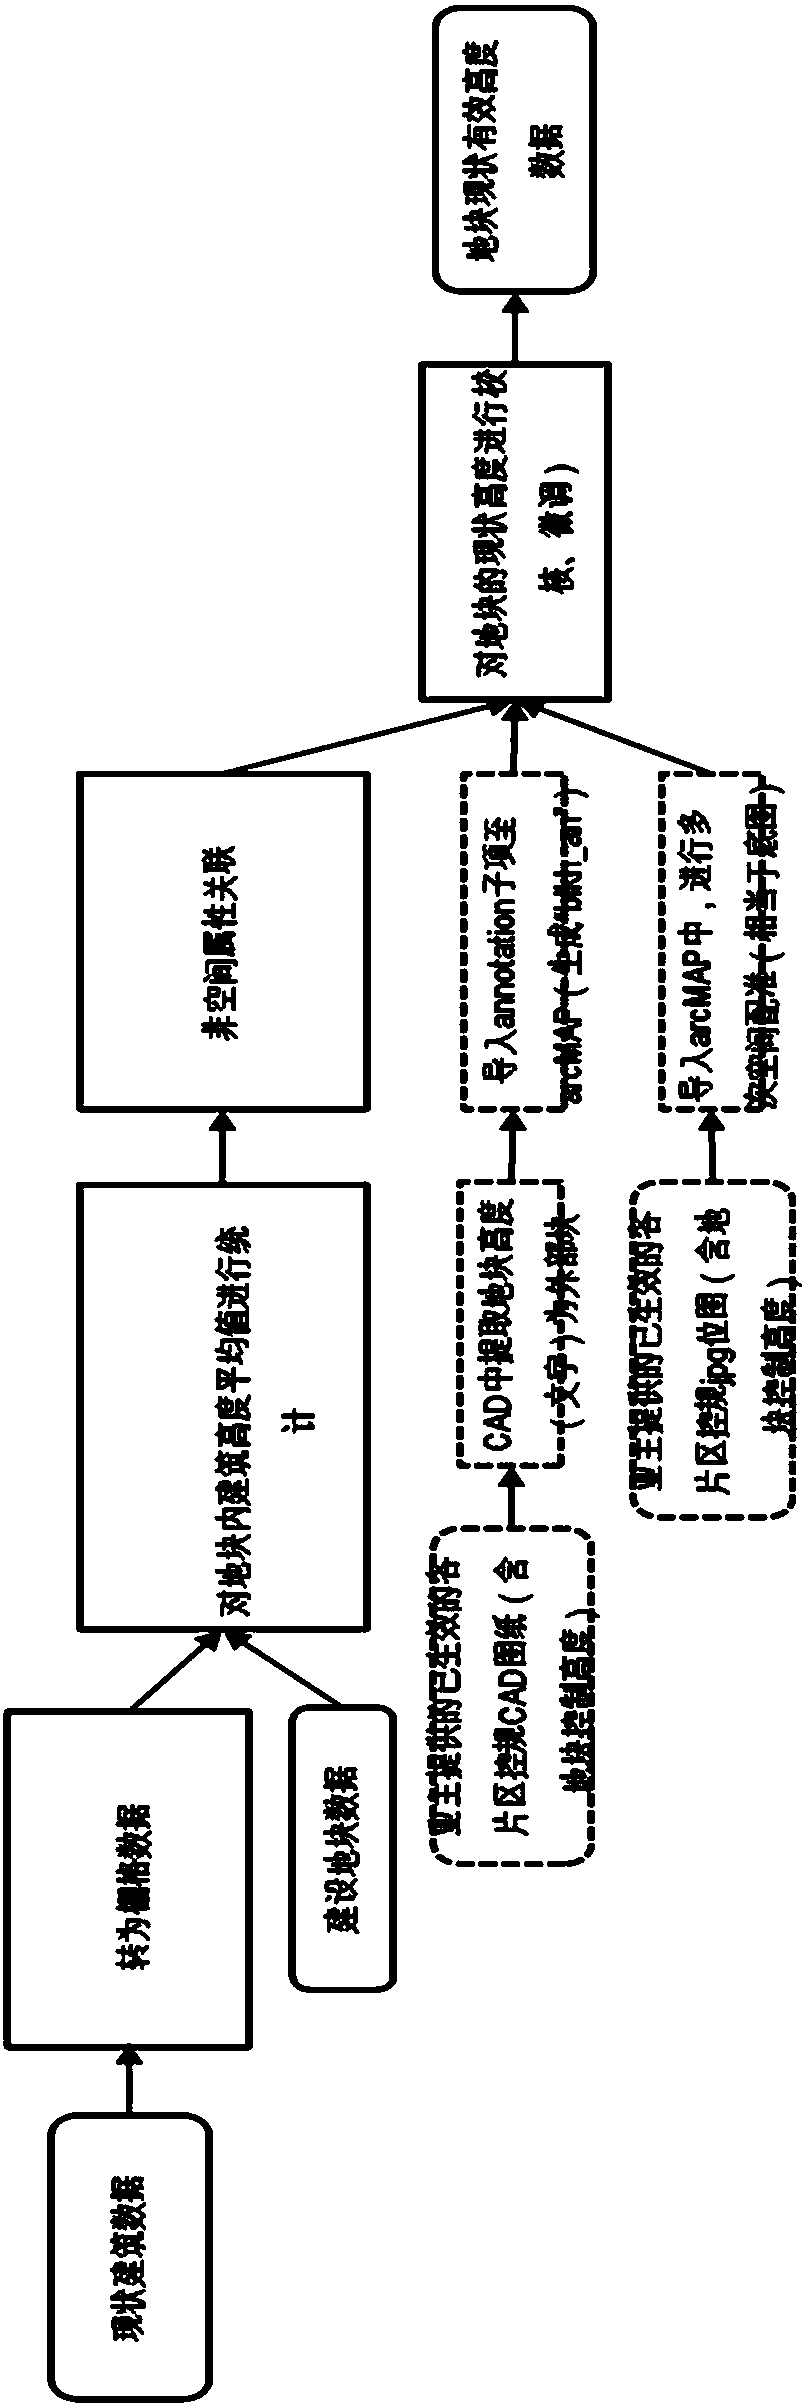 Parcel height limitation analysis system and method based on current situation visual corridor